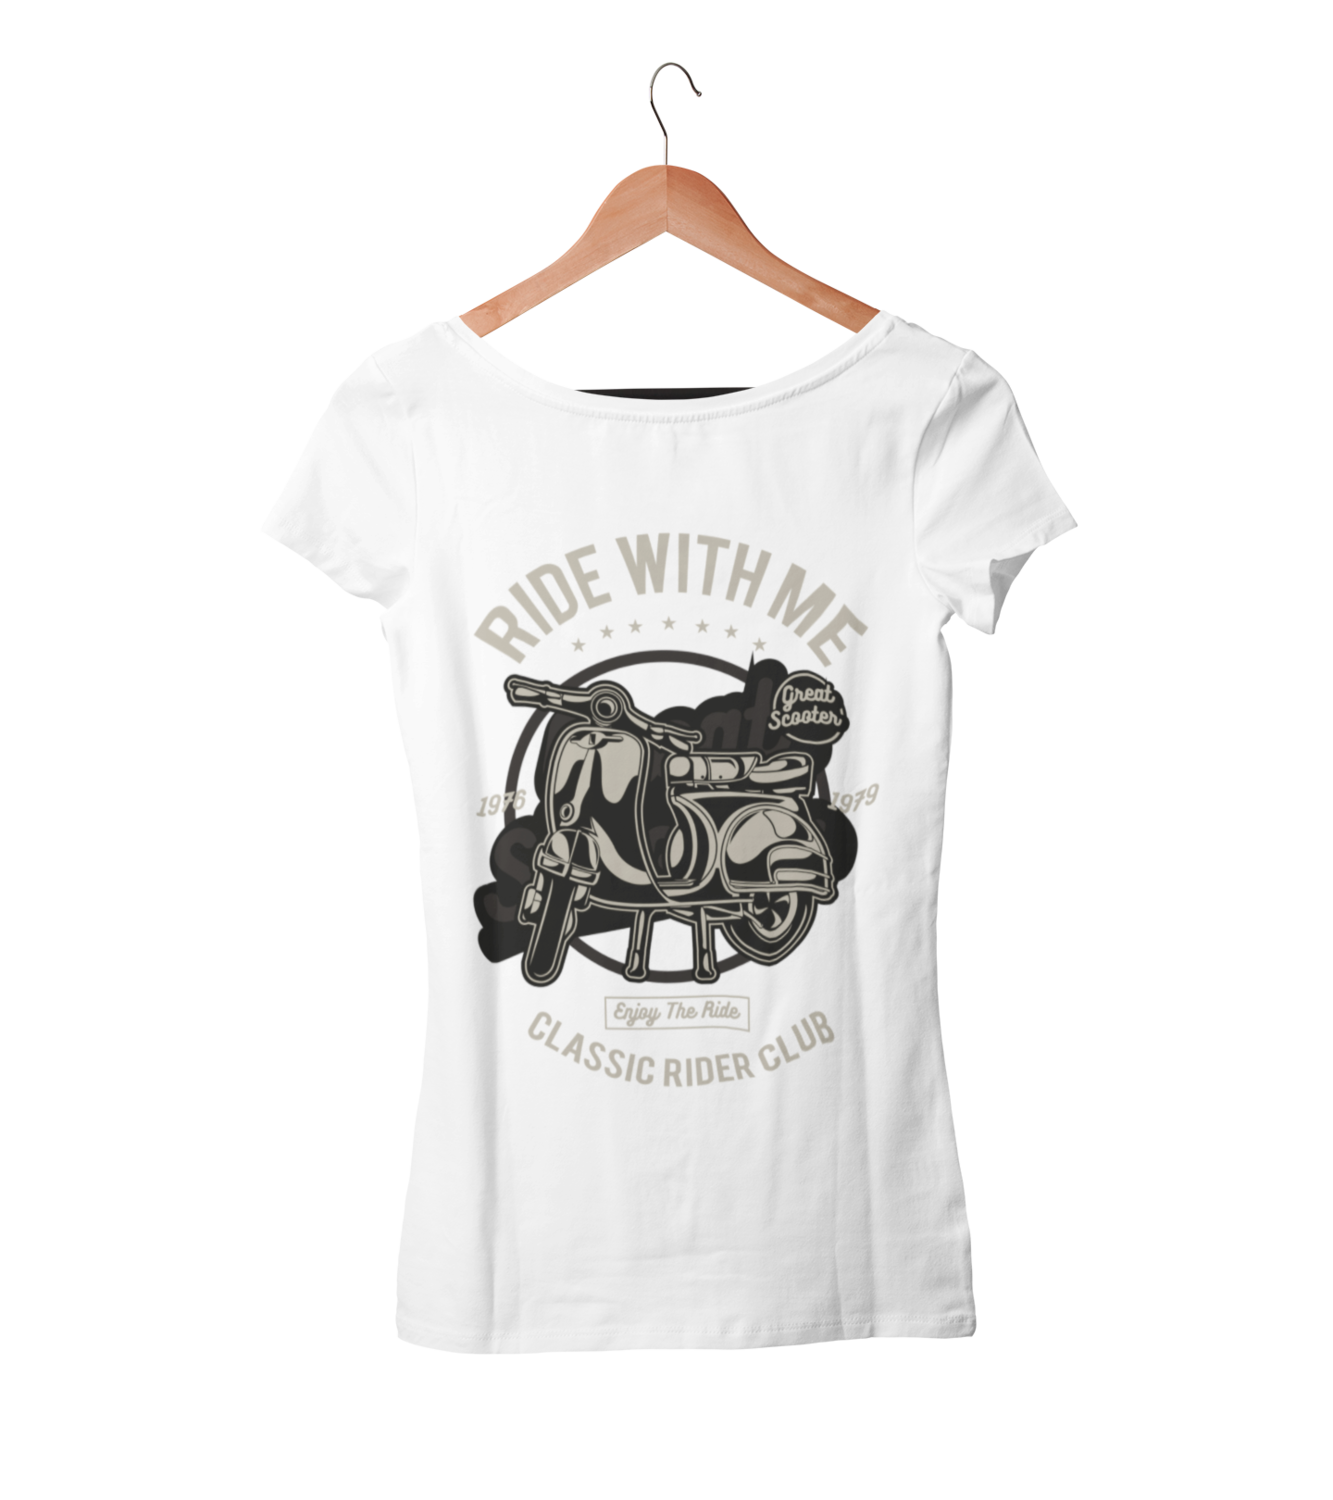 RIDE WITH ME T-SHIRT FOR WOMEN